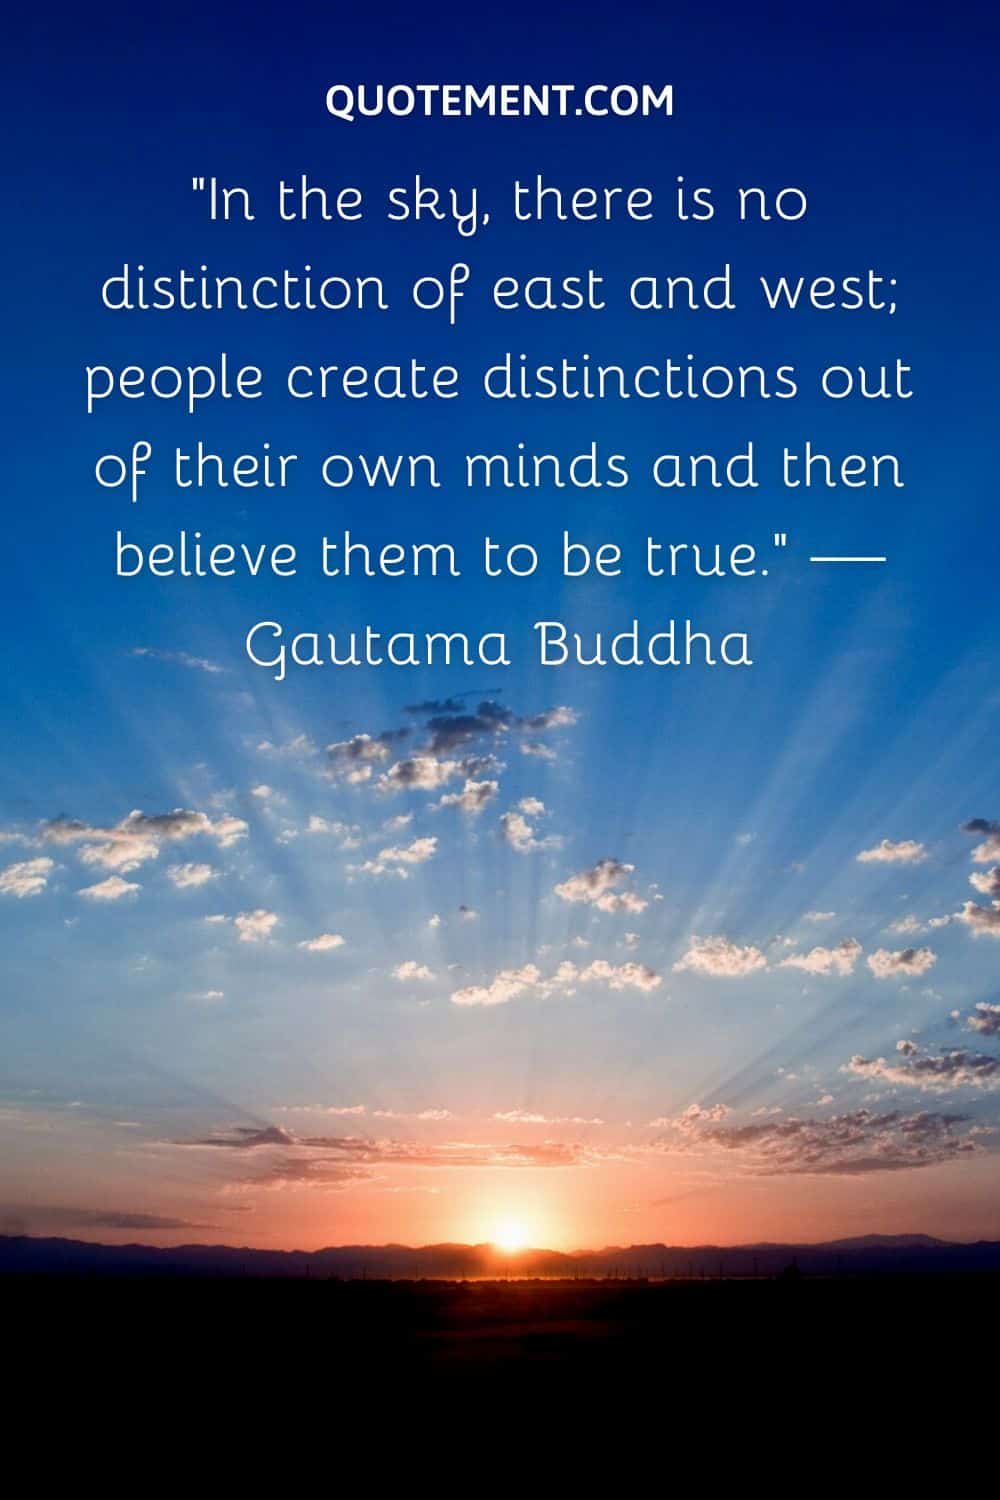 In the sky, there is no distinction of east and west